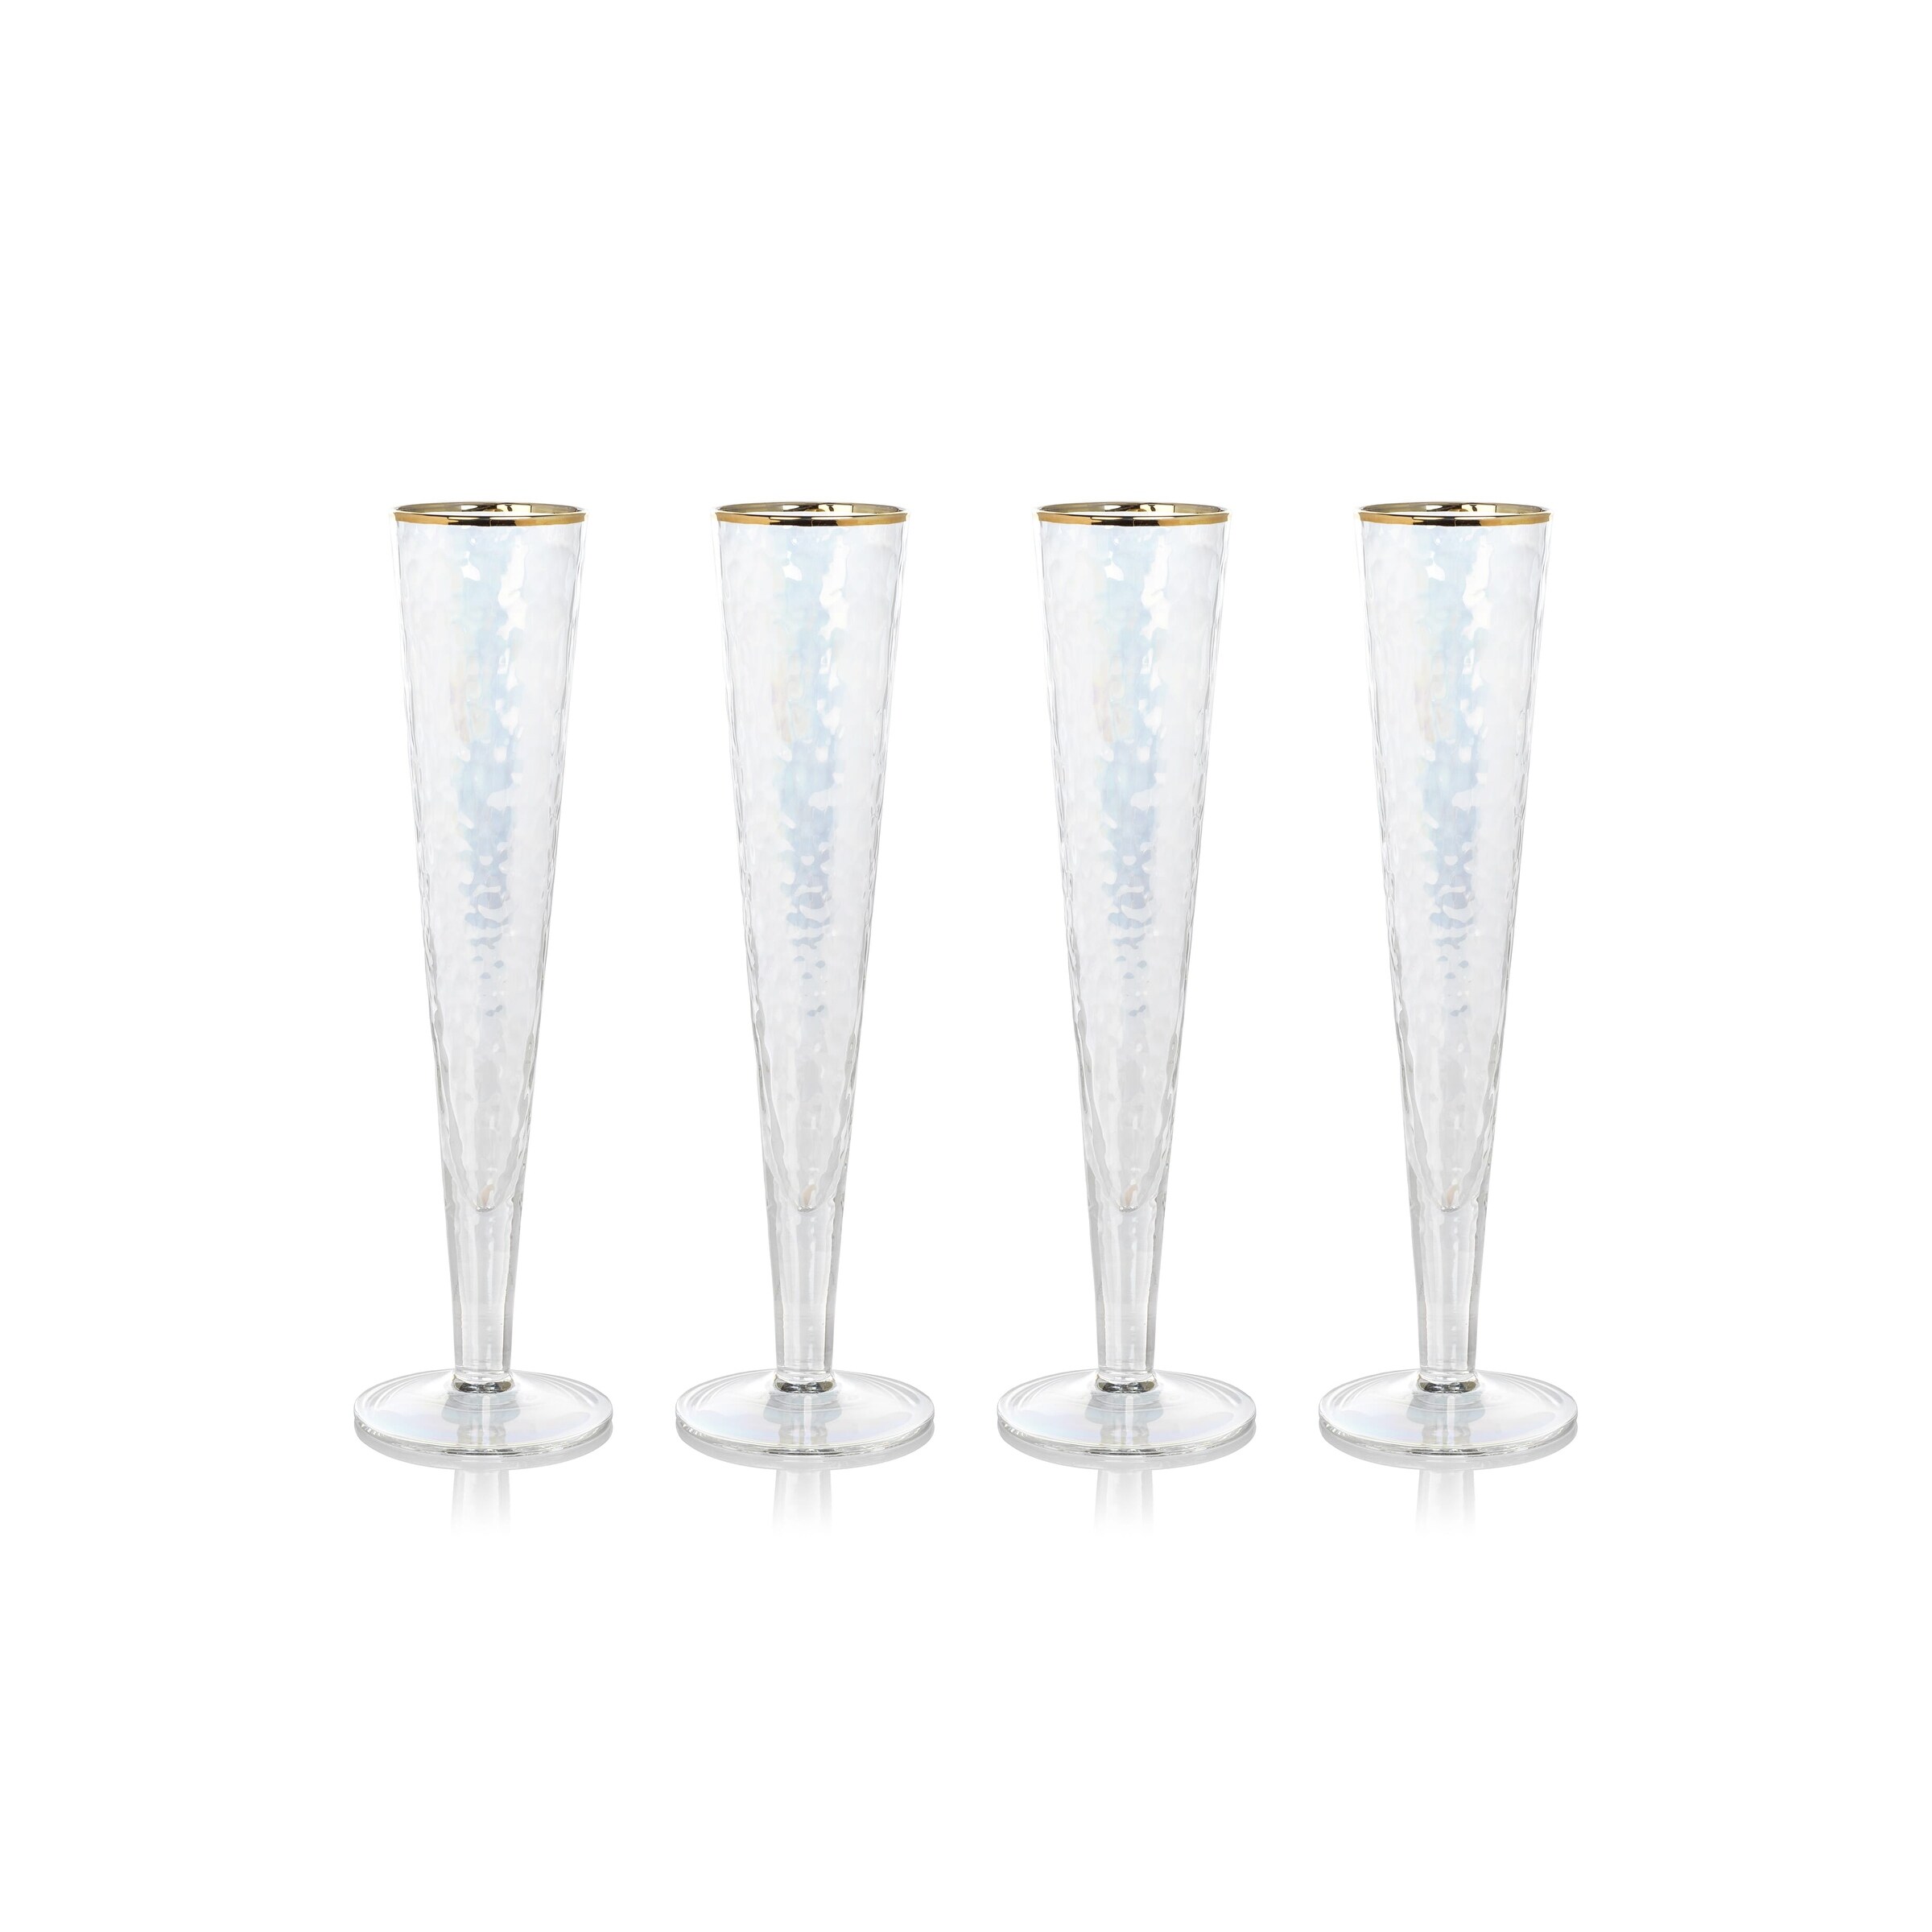 https://ak1.ostkcdn.com/images/products/is/images/direct/bff792256dcf3507547956bc9589397886473368/Kampari-Slim-Champagne-Flutes-with-Gold-Rim%2C-Set-of-4.jpg